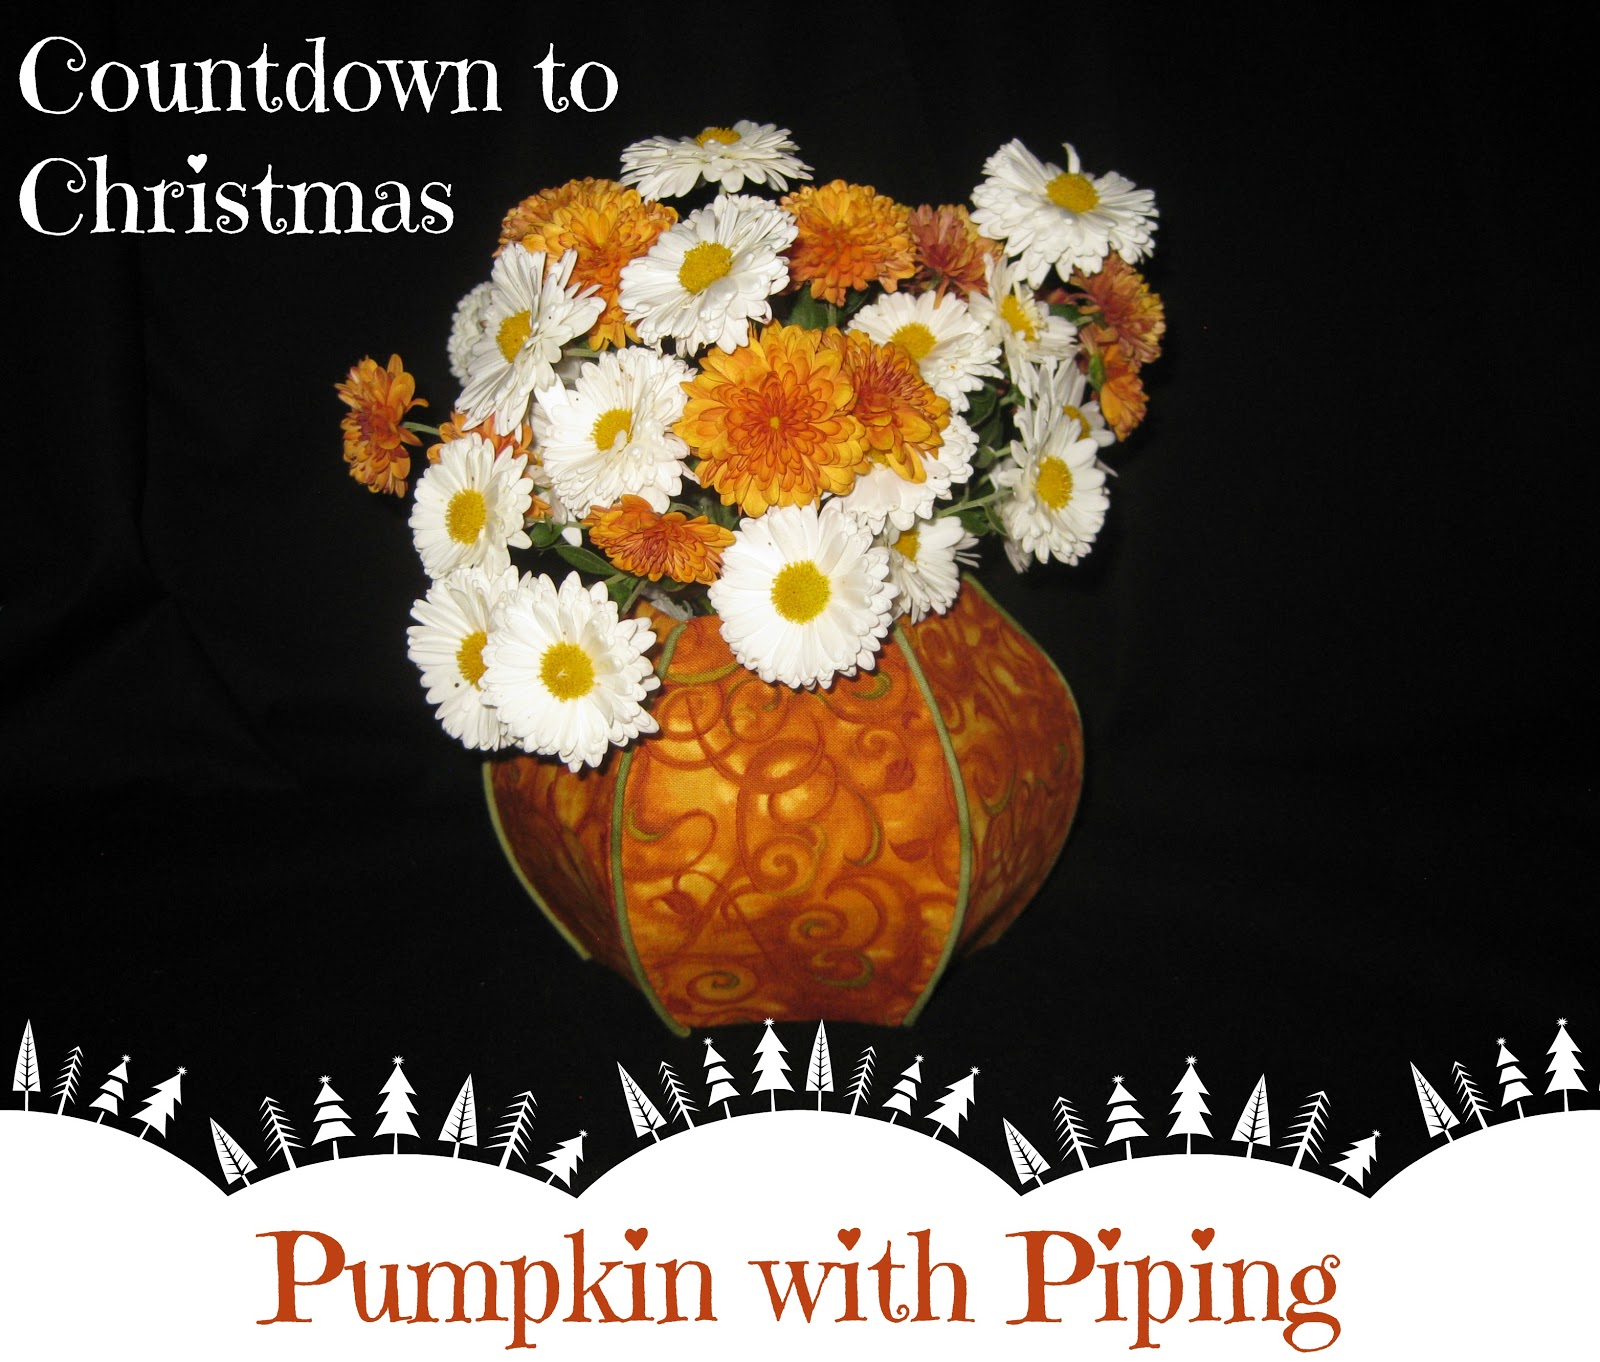 Pumpkin with Piping